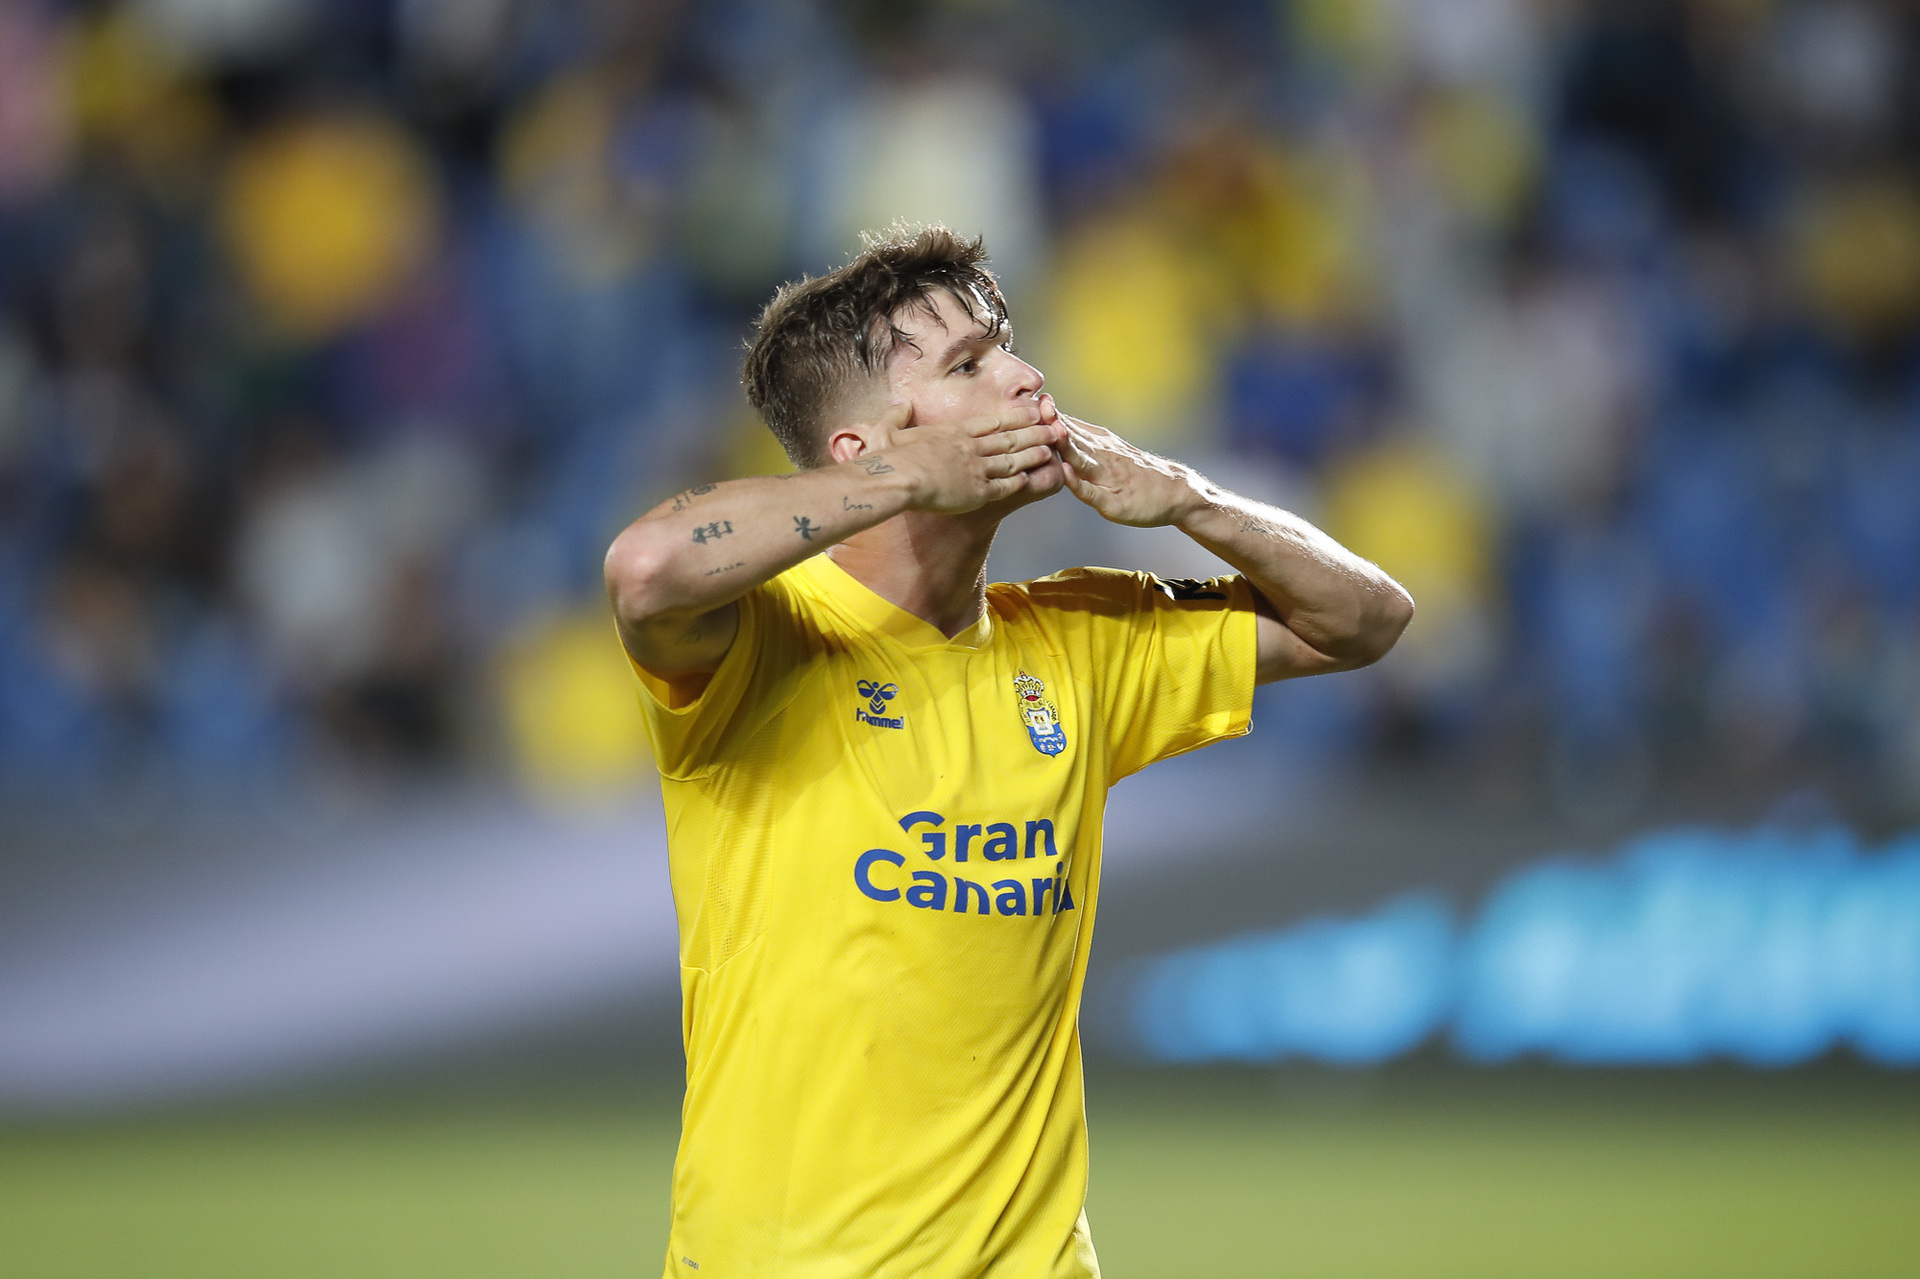 Marc Cardona extends his contract with UD Las Palmas until 2026 UD